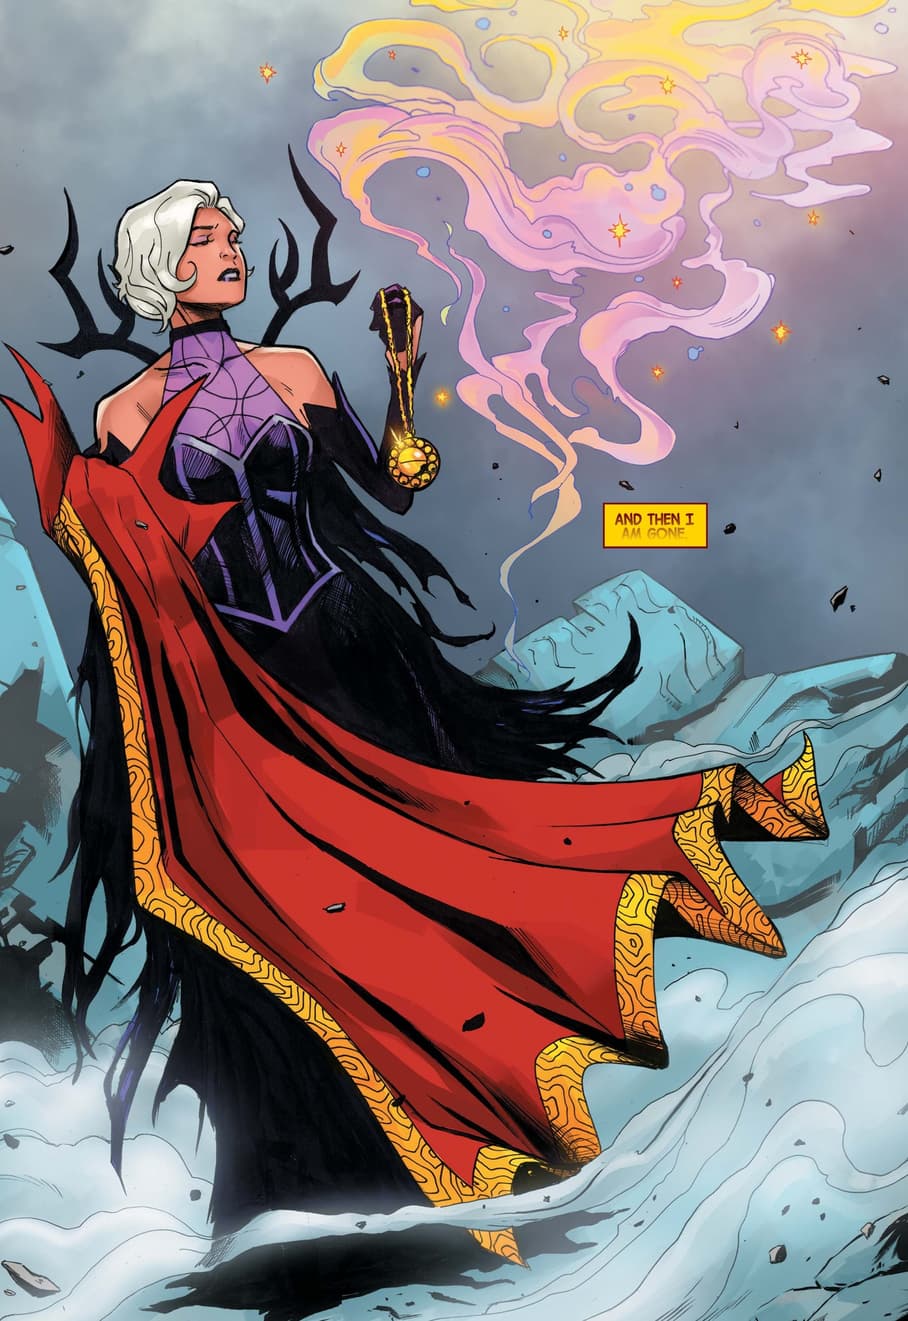 Clea becomes the Sorcerer Supreme.